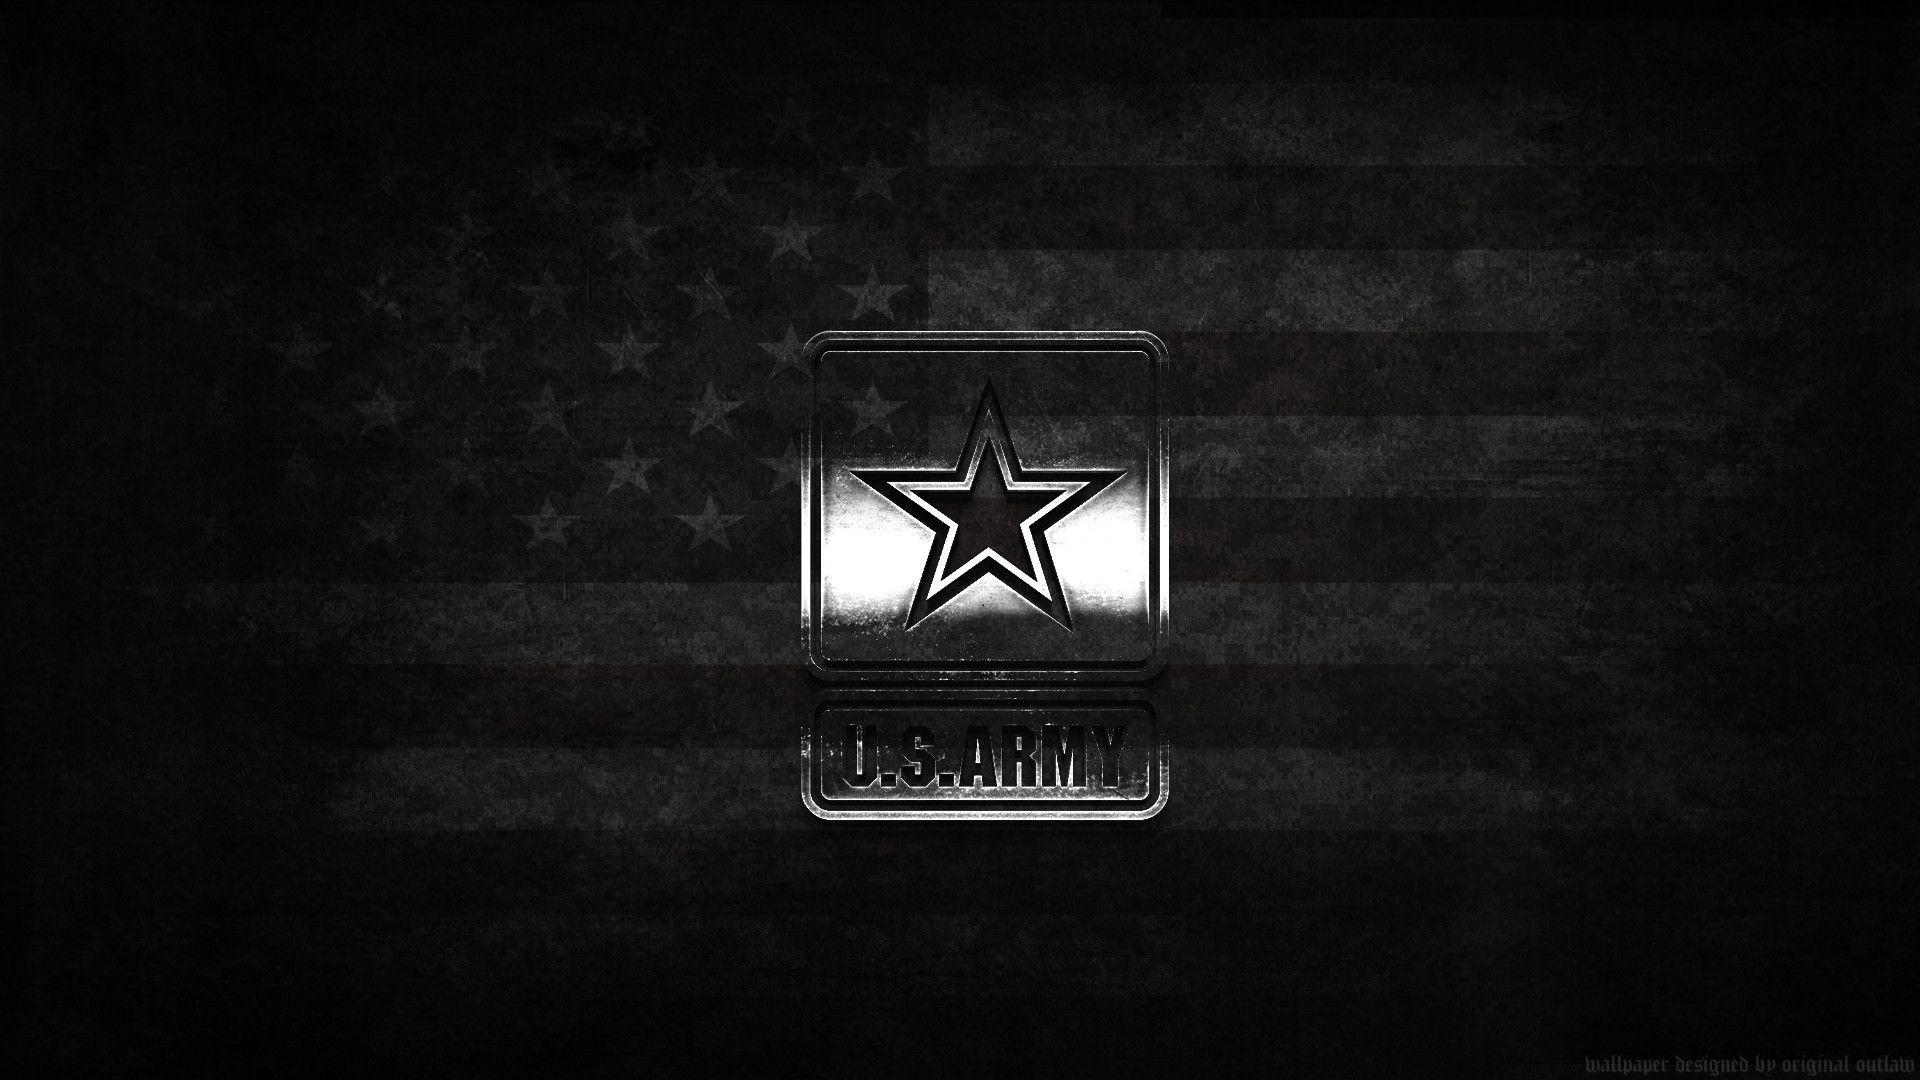 US Army Wallpaper Backgrounds - Wallpaper Cave